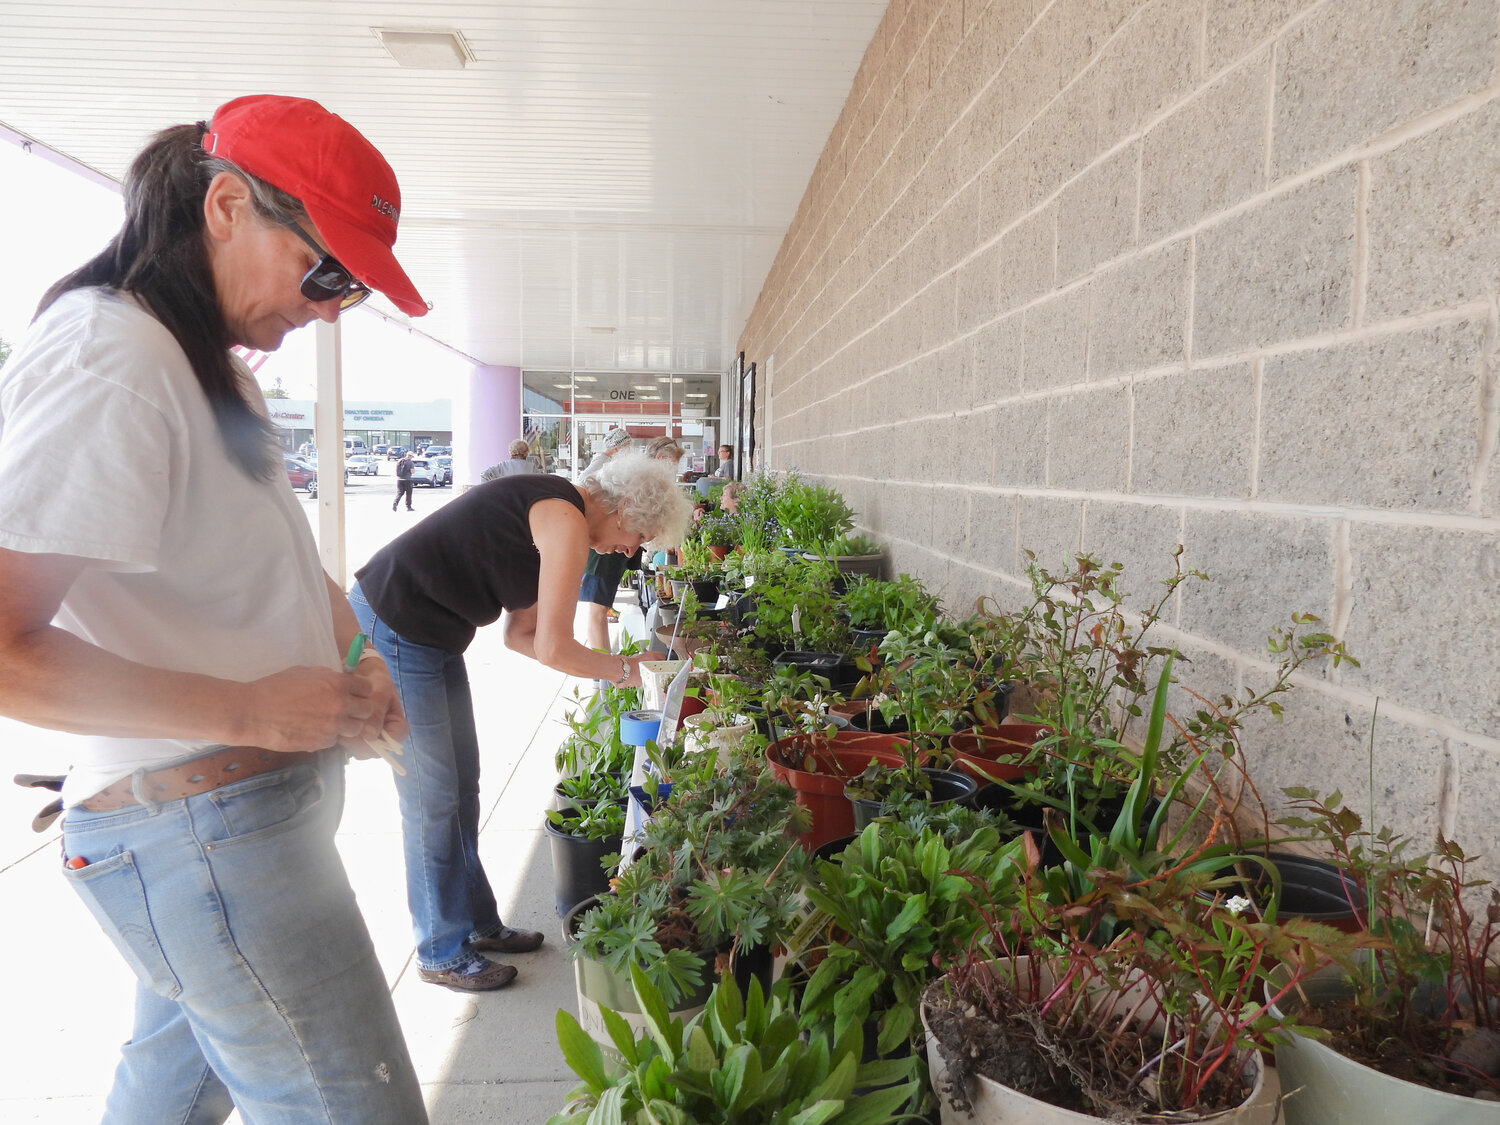 Green Thumb Garden Club of Oneida Castle members mark plants before they go for sale.